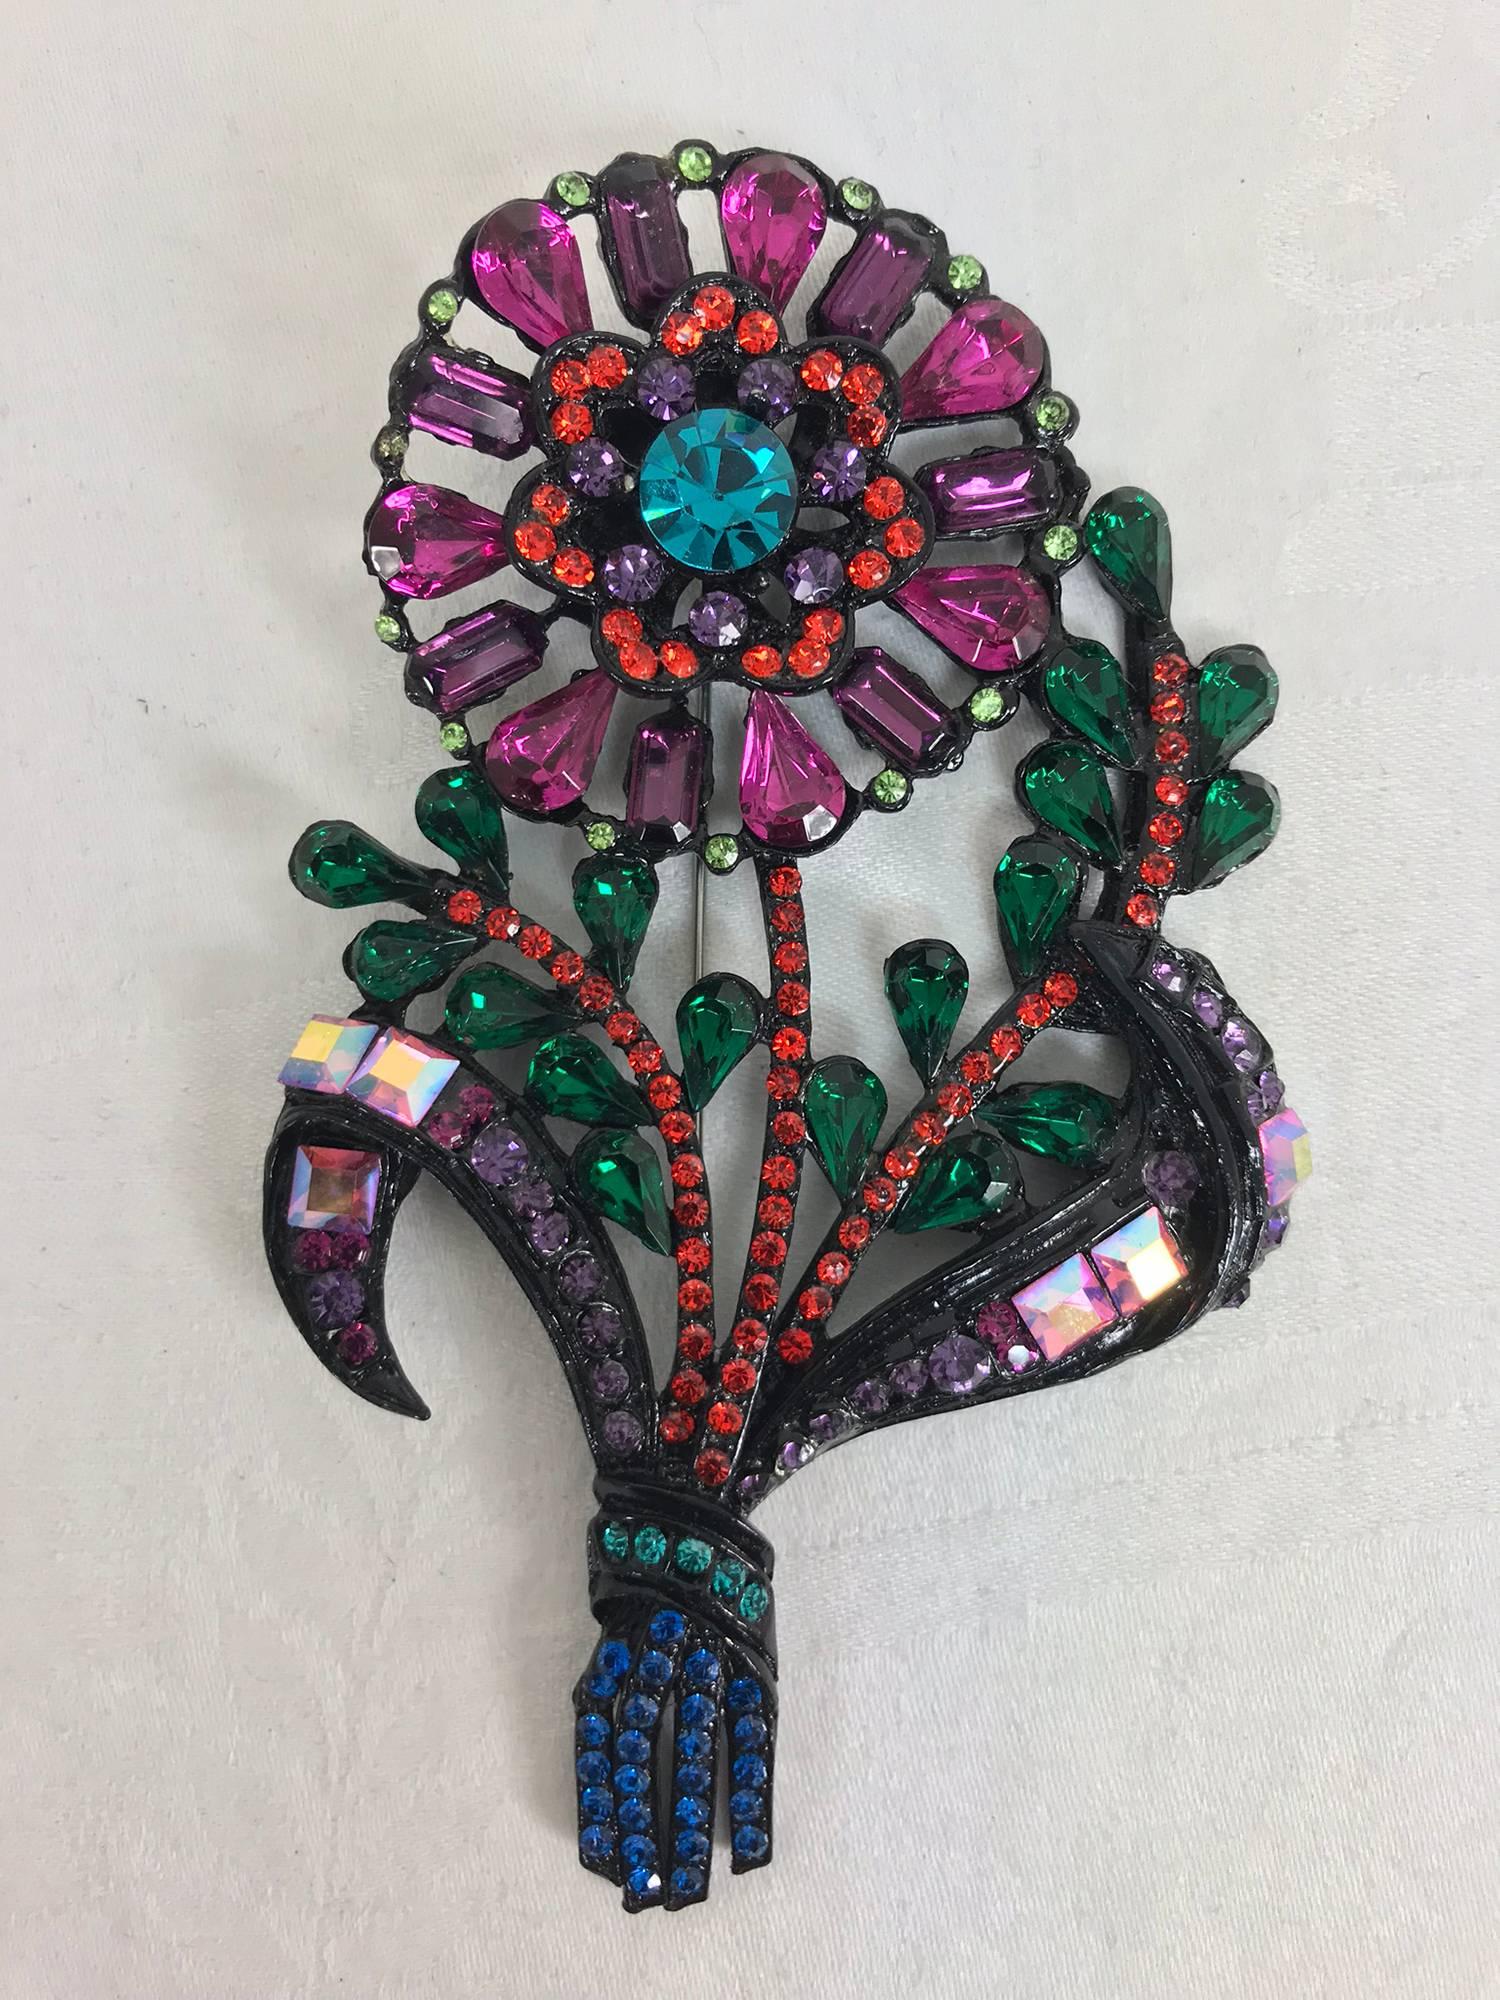 Thelma Deutsch large rhinestone flower brooch with multi-colour stones from the 1980s.
Approximate measurements:
5 1/4